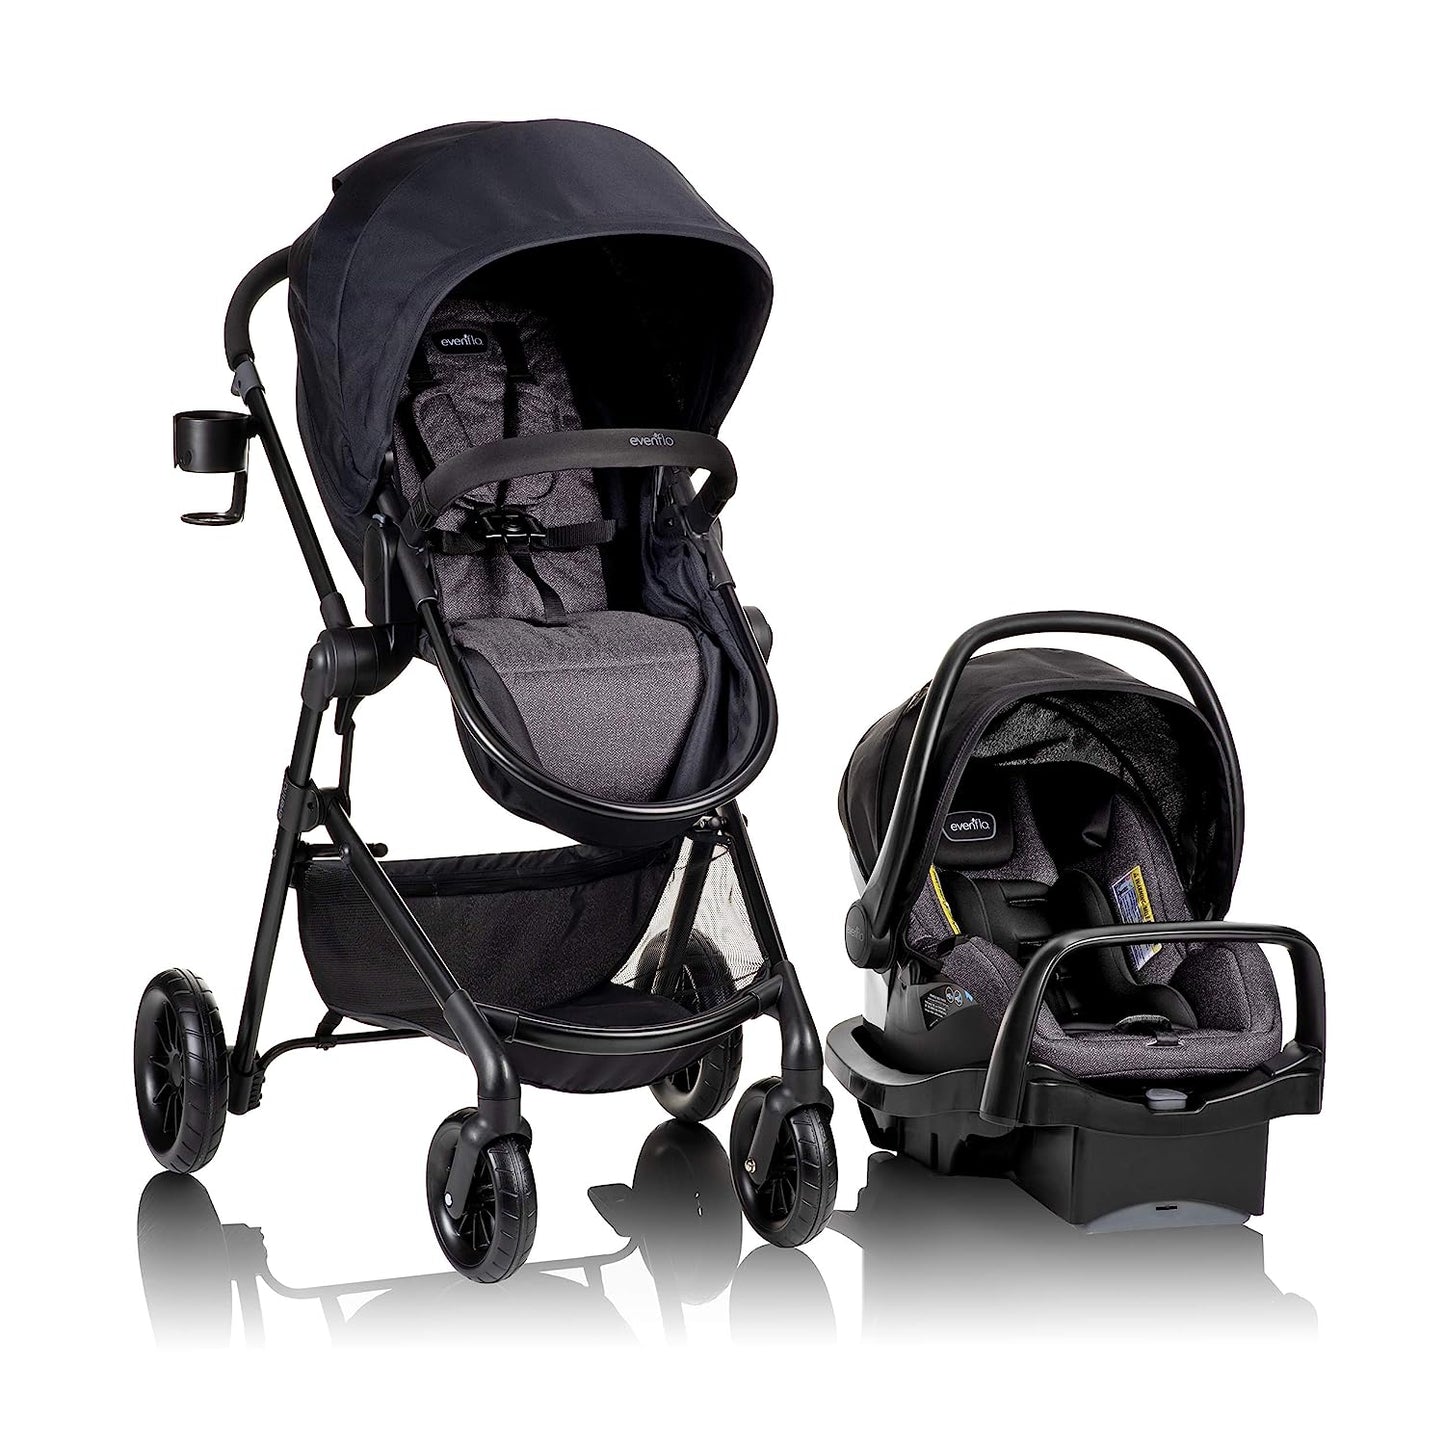 New Evenflo Pivot Modular Travel System with Infant Car Seat (Casual Gray)